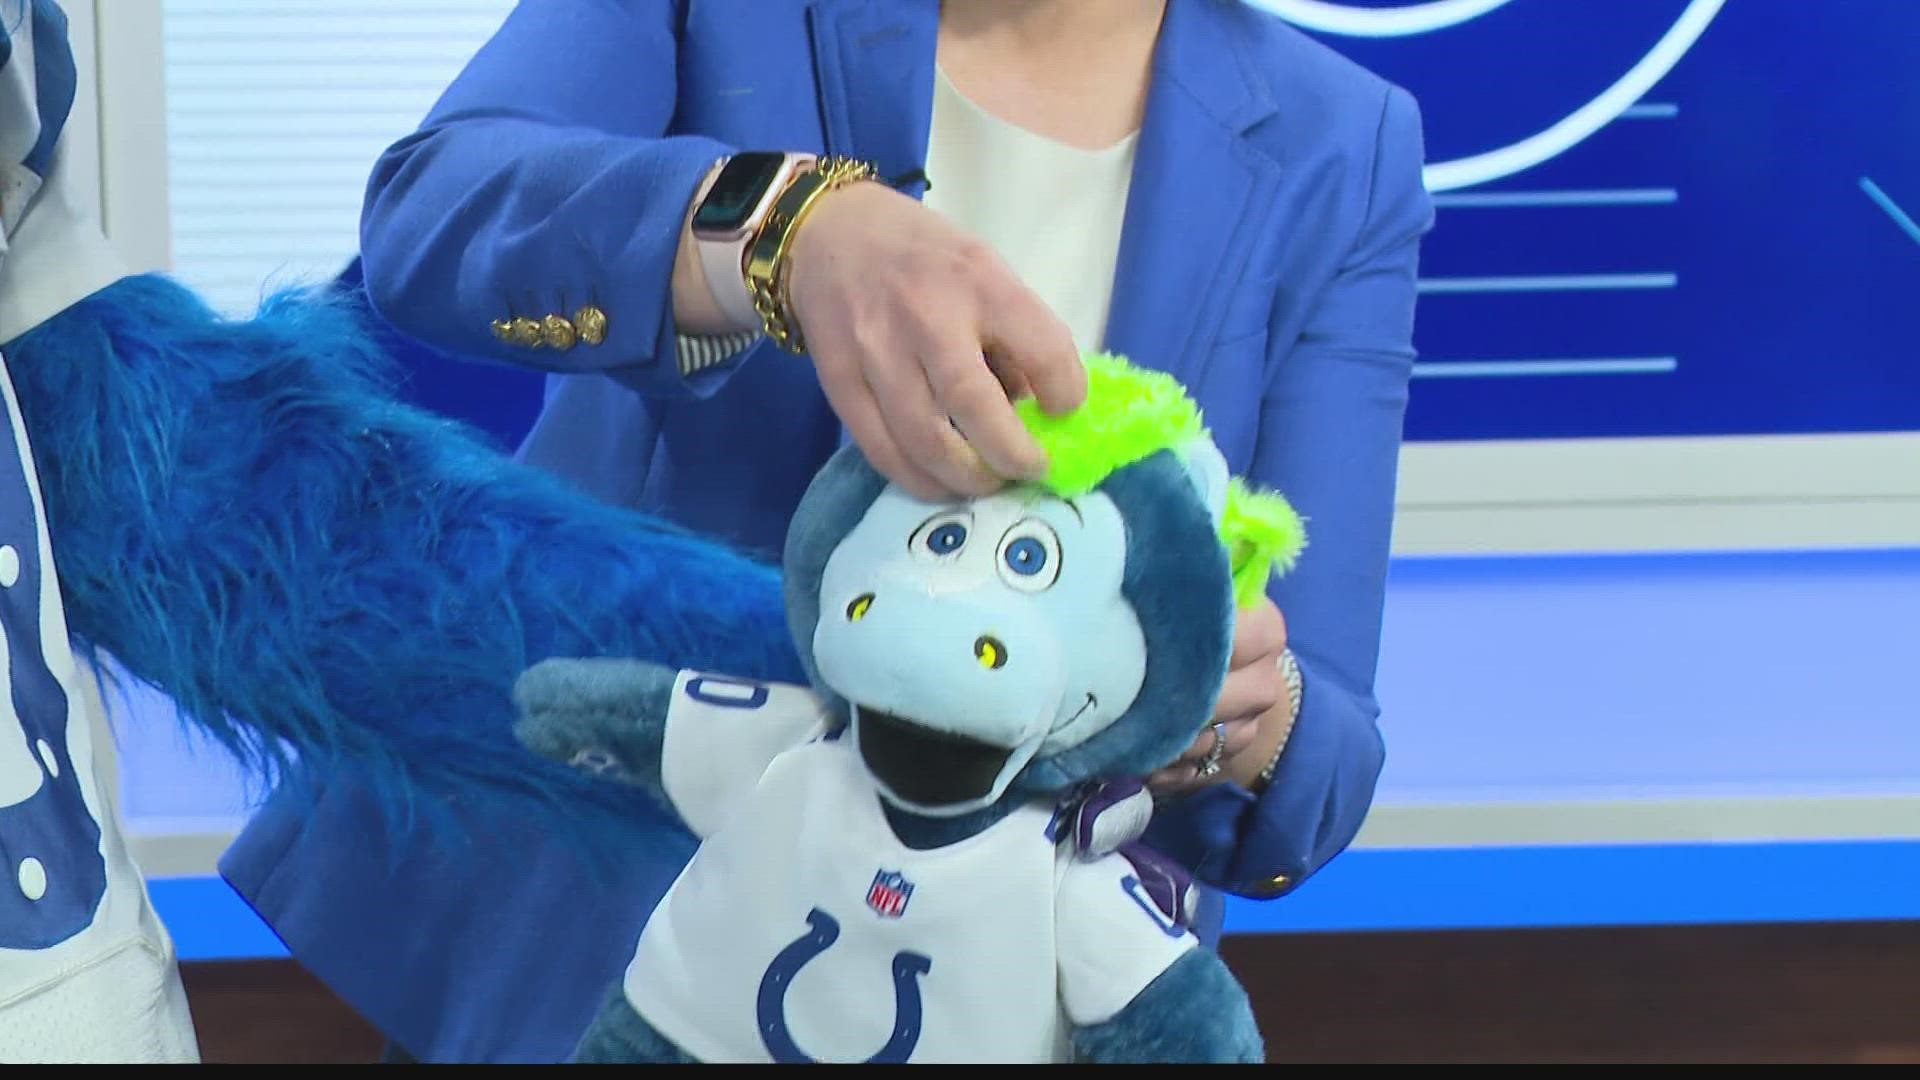 Colts, BuildABear introduce plush version of Blue mascot